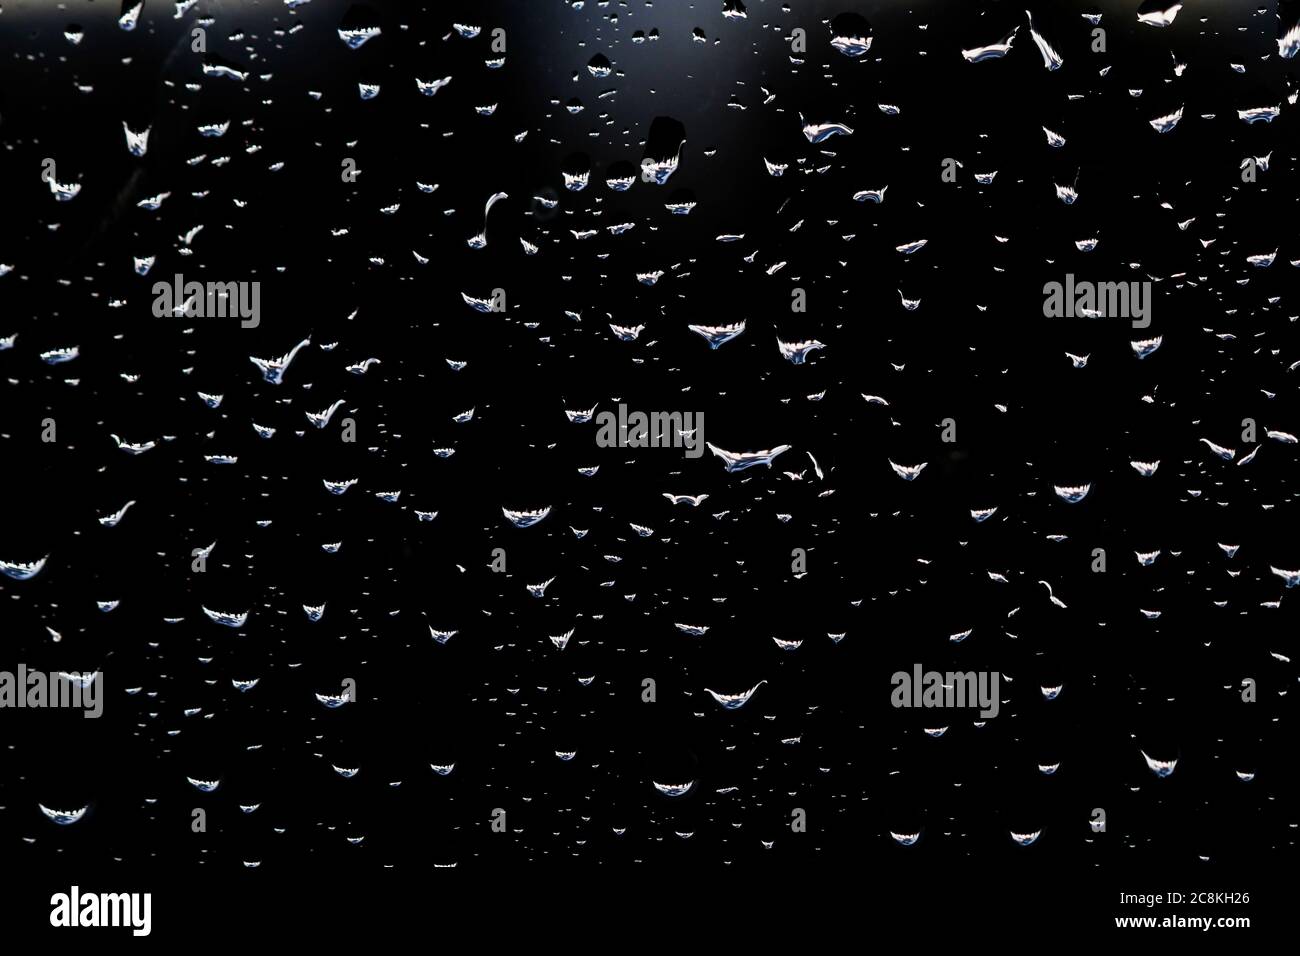 Raindrops on the window. Abstract background. Graphic resources Stock Photo